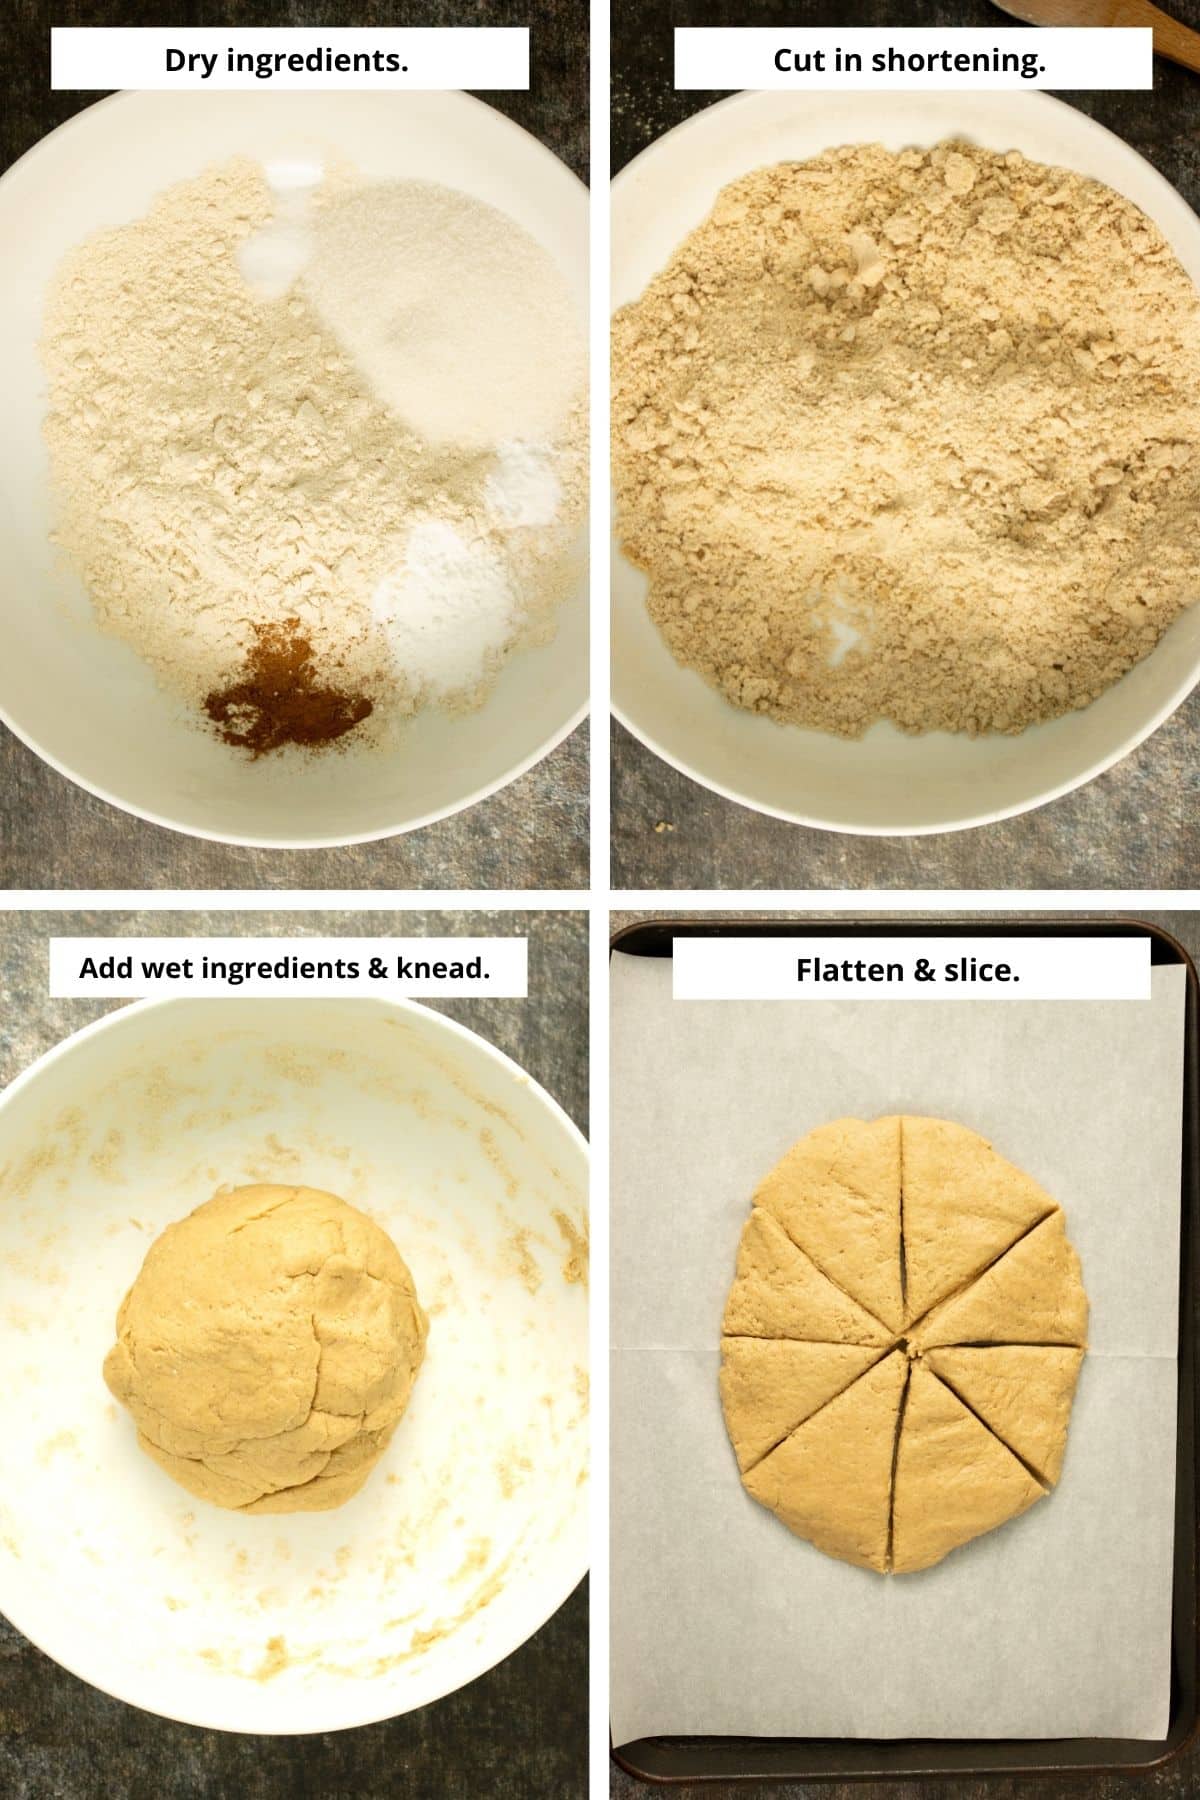 image collage showing the dry ingredients in the bowl and after adding the shortening, the dough in a ball, and the dough flattened and cut on the baking sheet